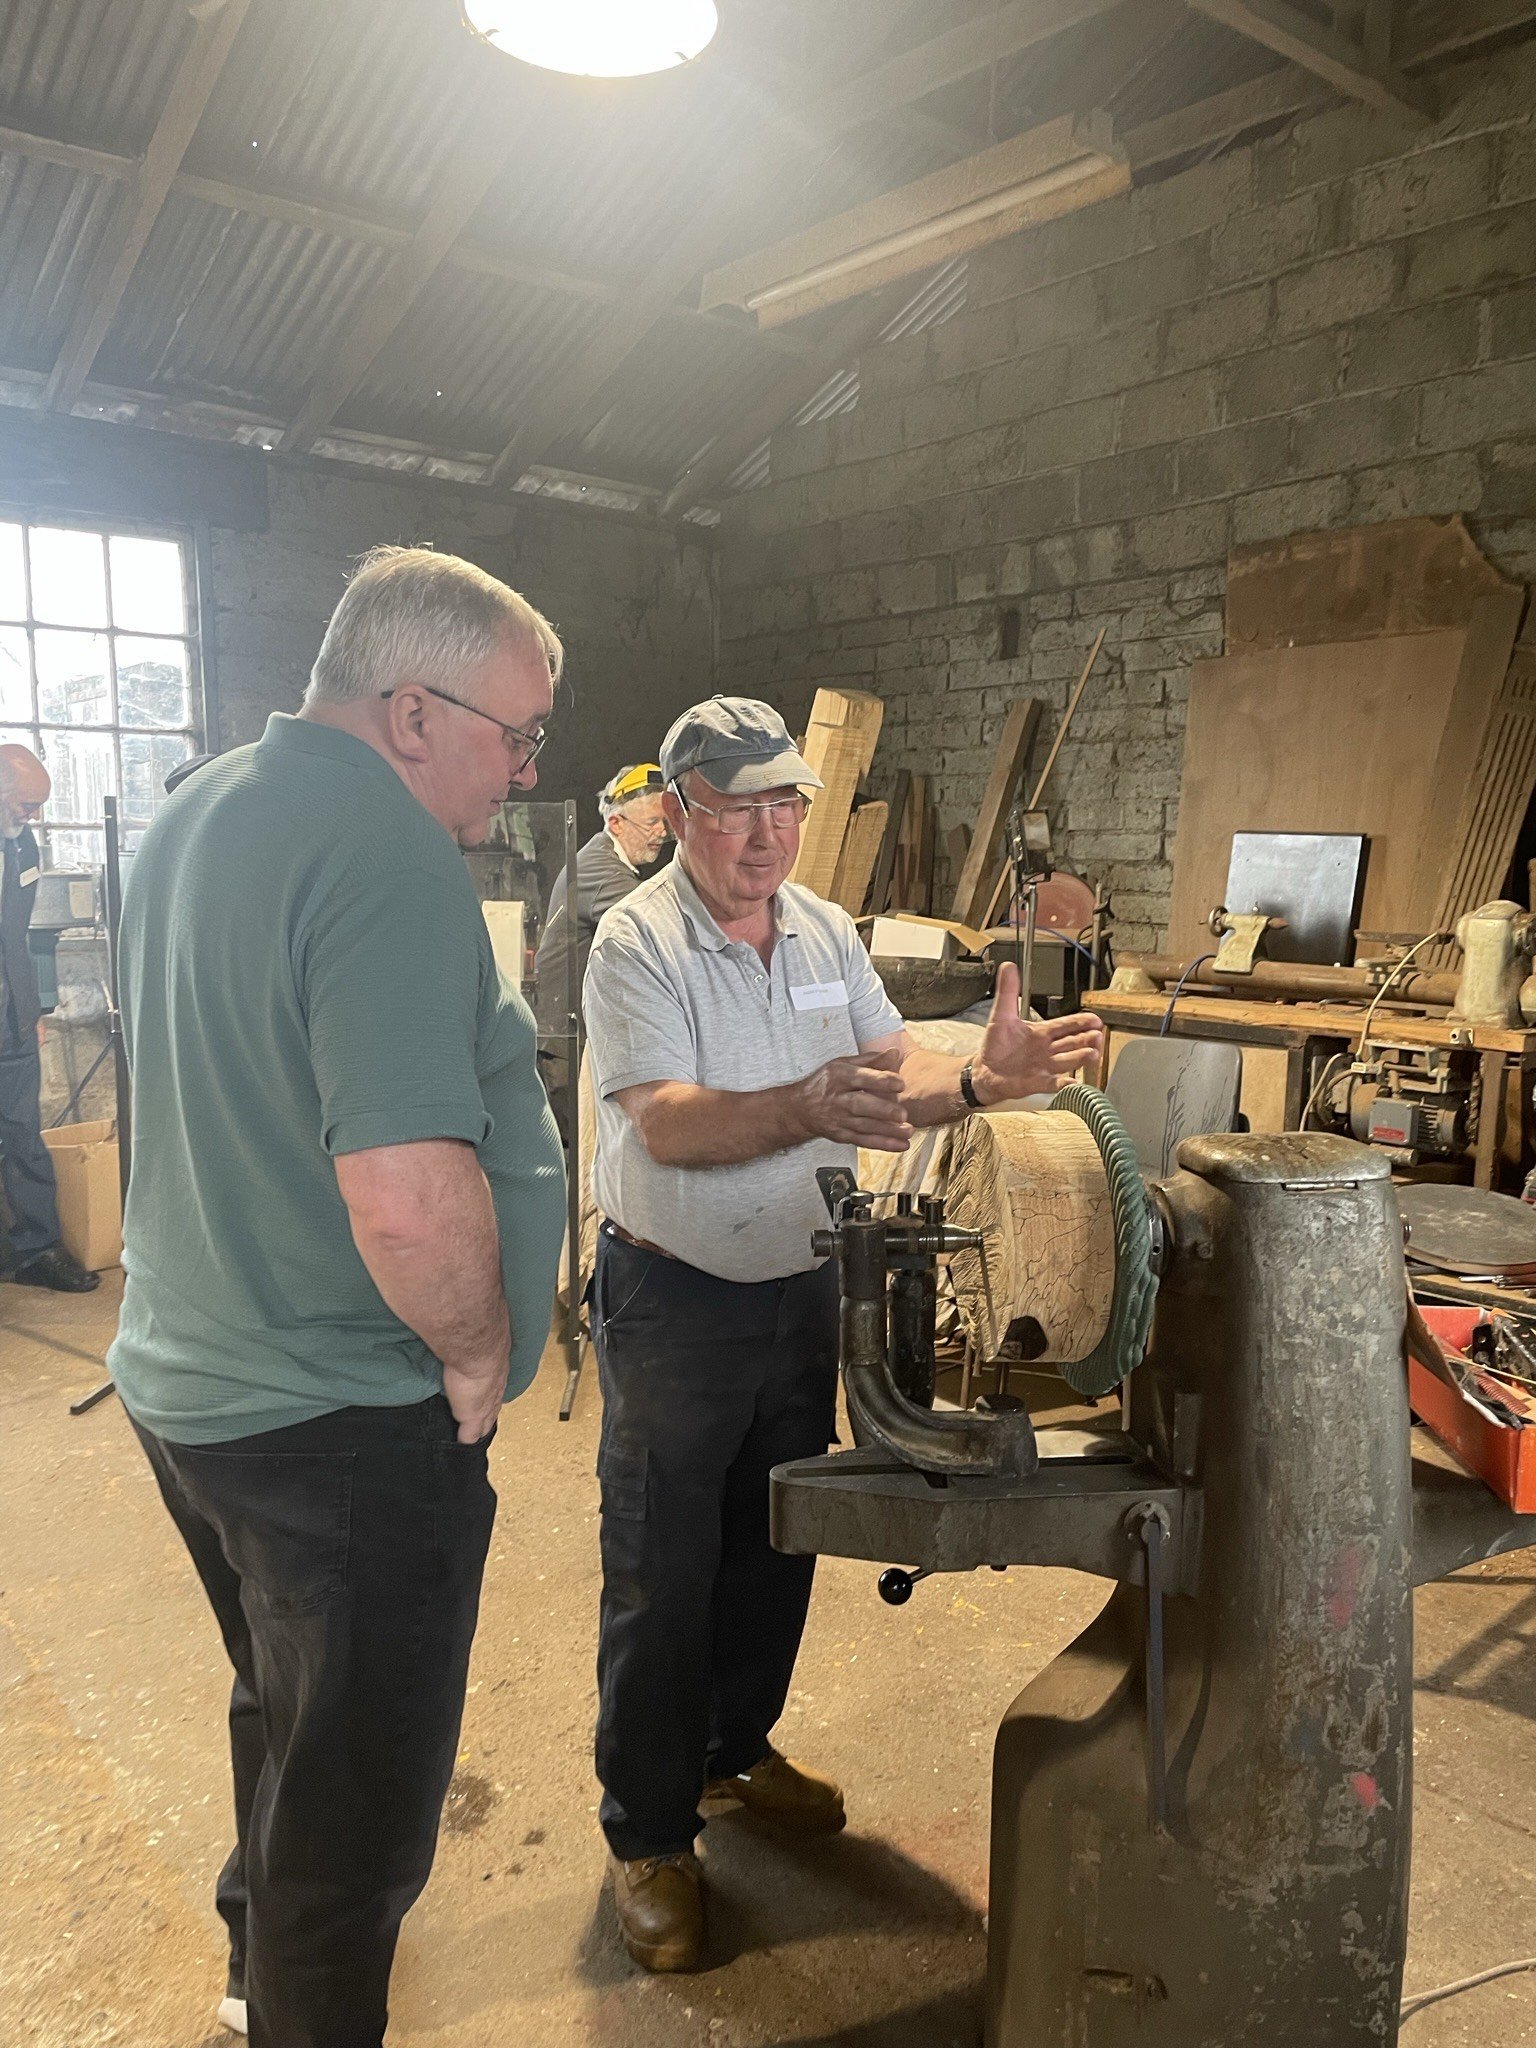 Paddy O'Connor showing the McNaughton Coring System